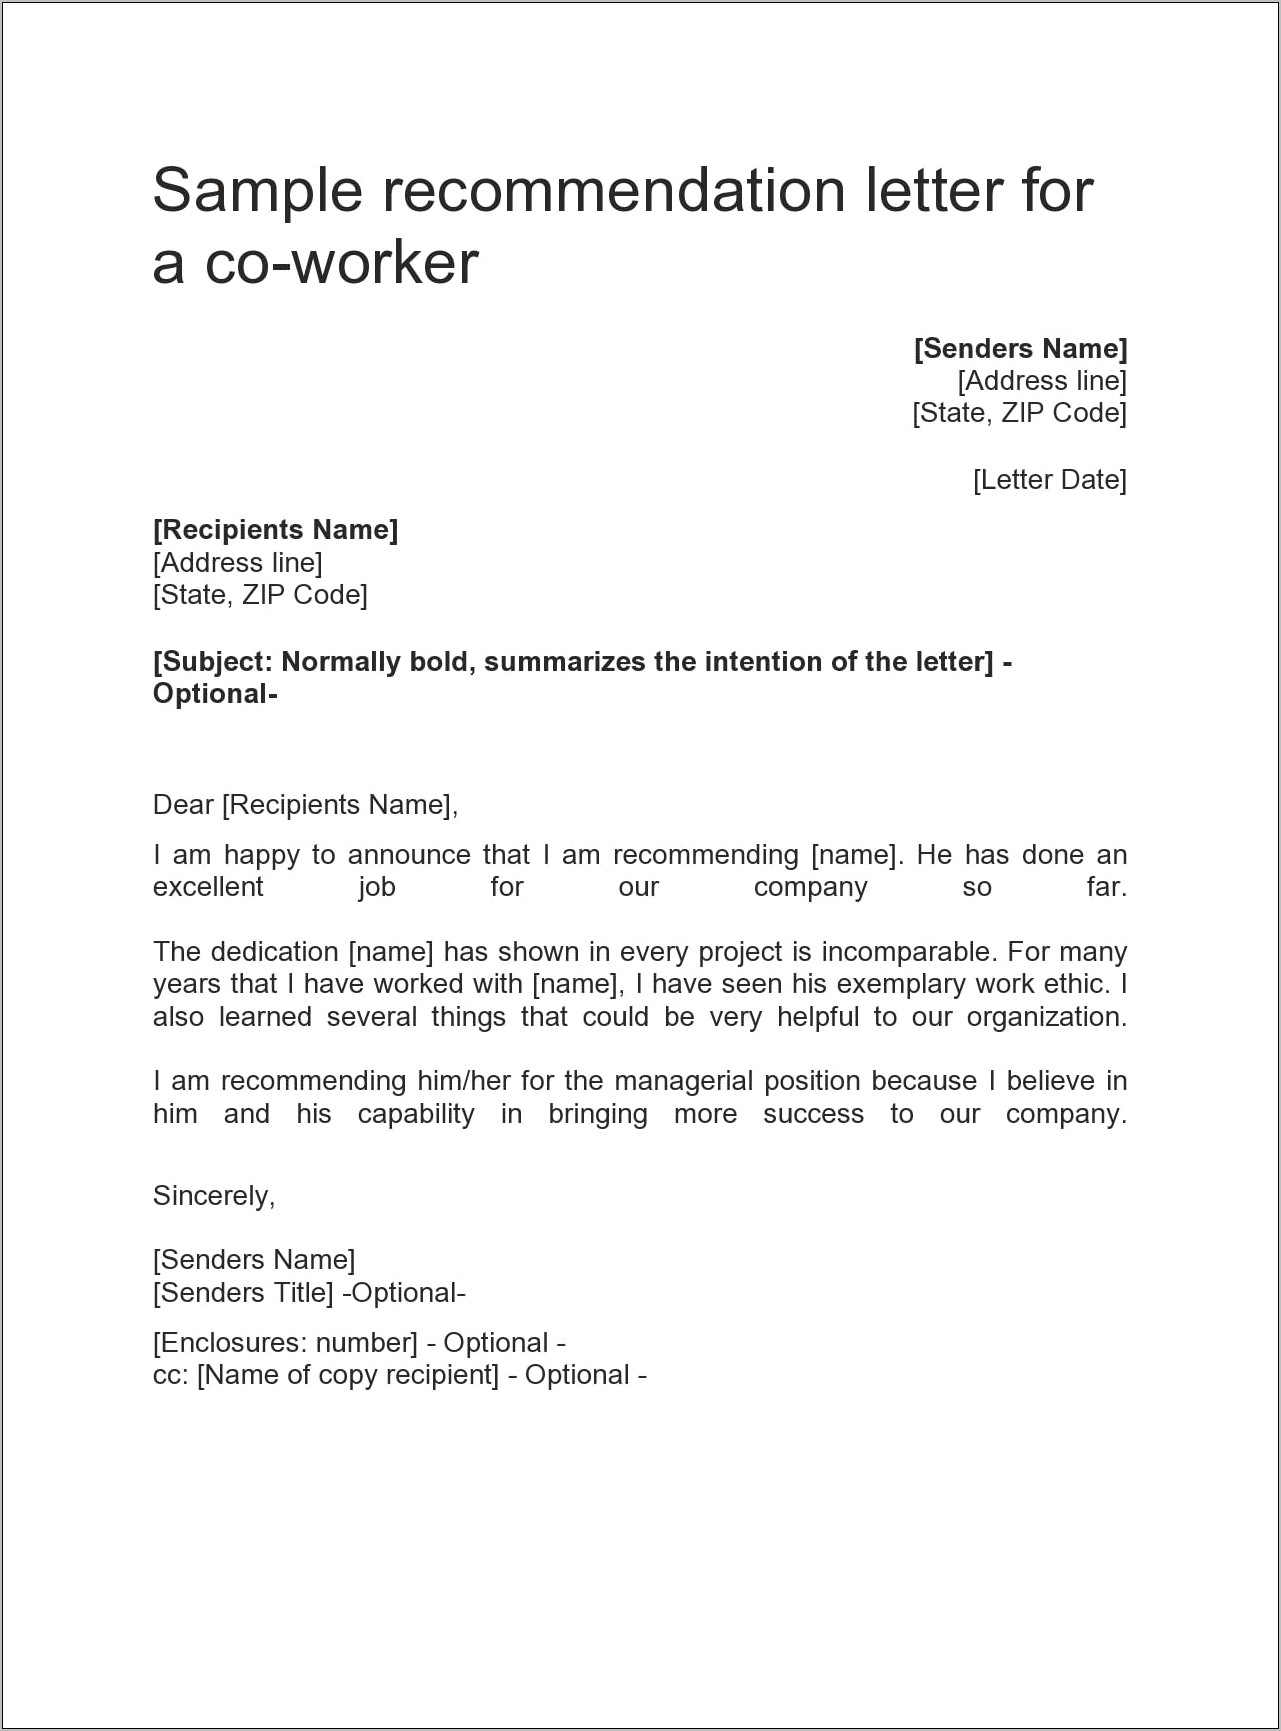 Example Resume For Letter Of Recommendation Resume Example Gallery